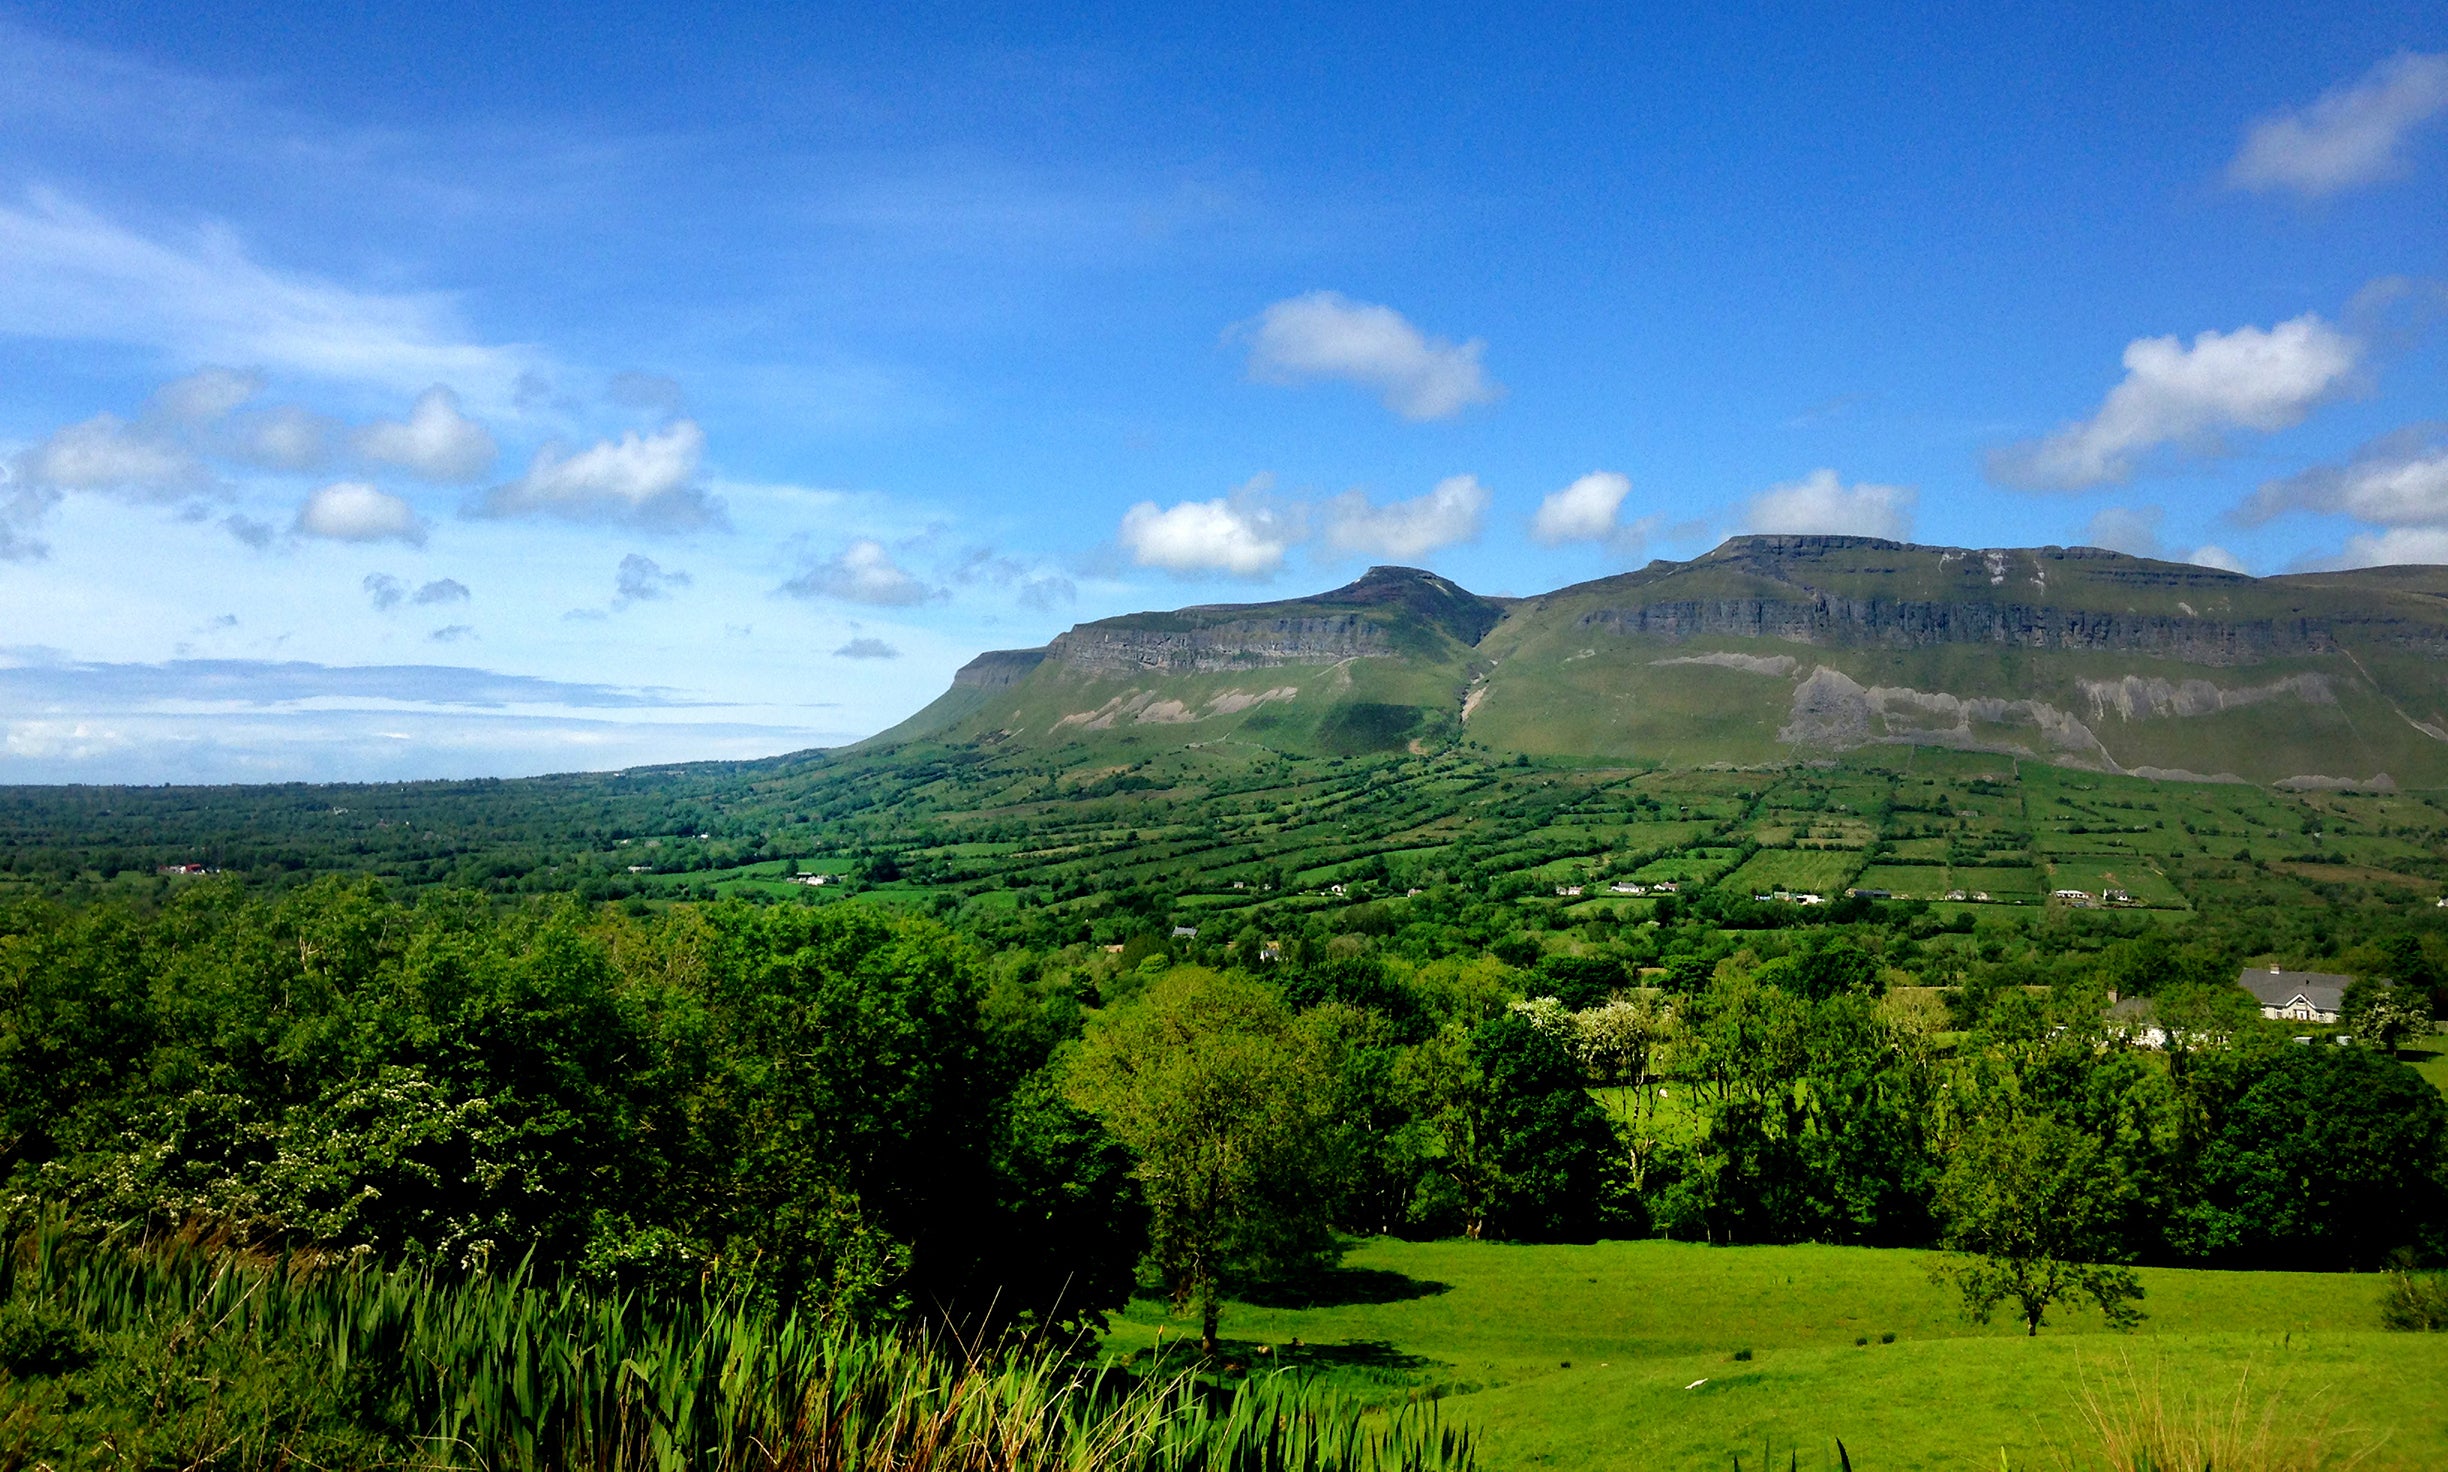 Ben Bulben dominates the landscape near the coast. The mountain is said to be the final resting place of two eloping lovers of Irish mythology